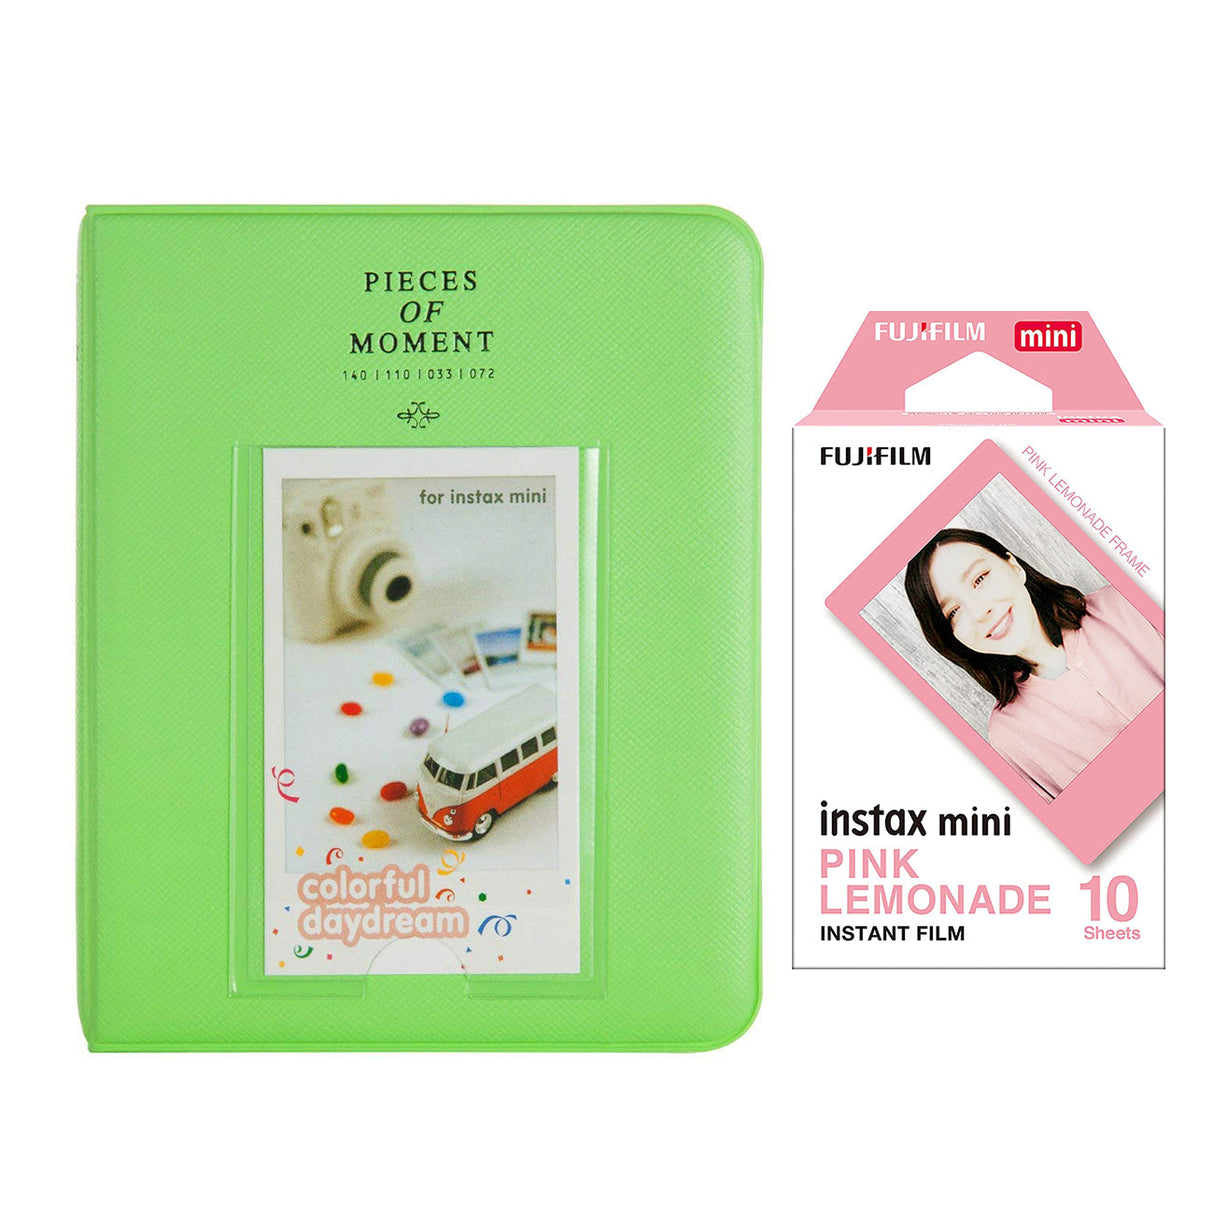 Fujifilm Instax Mini 10X1 pink lemonade Instant Film with Instax Time Photo Album 64 Sheets Lime green